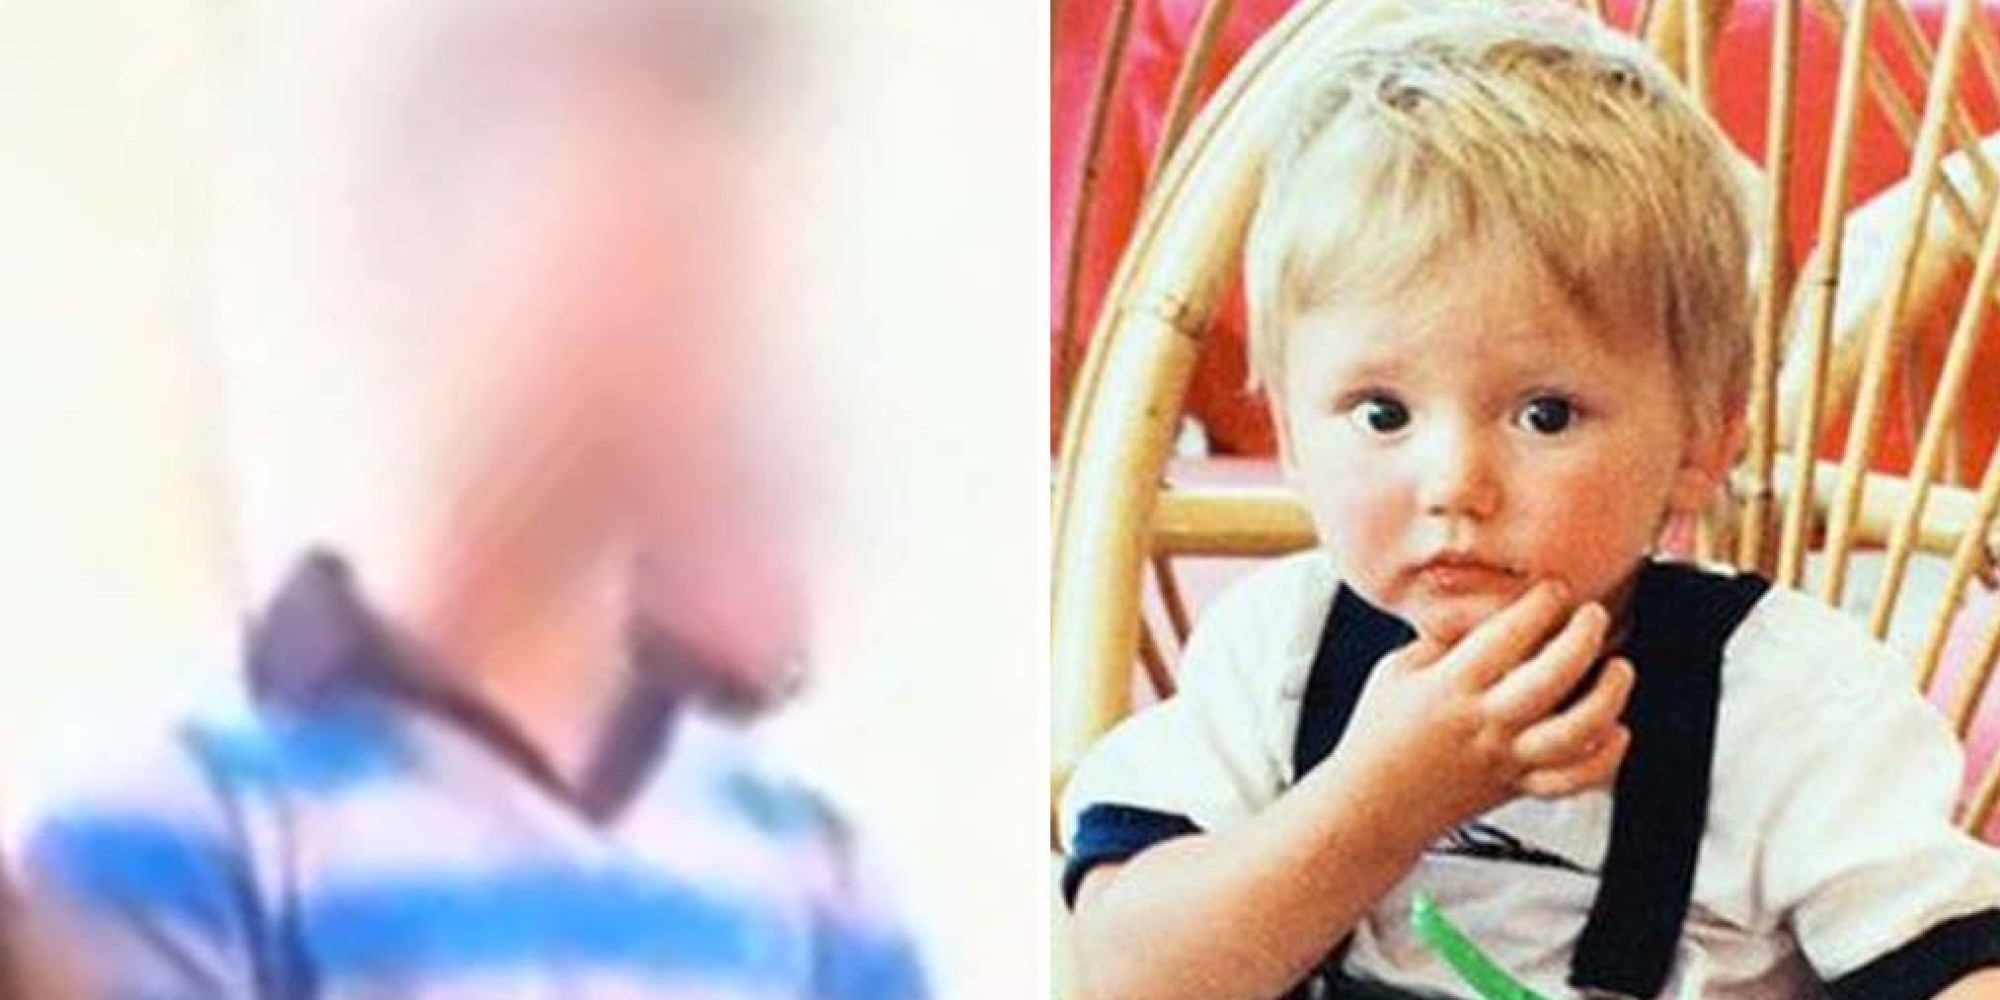 BEN NEEDHAM Investigators Call For DNA Tests On Man Living With.